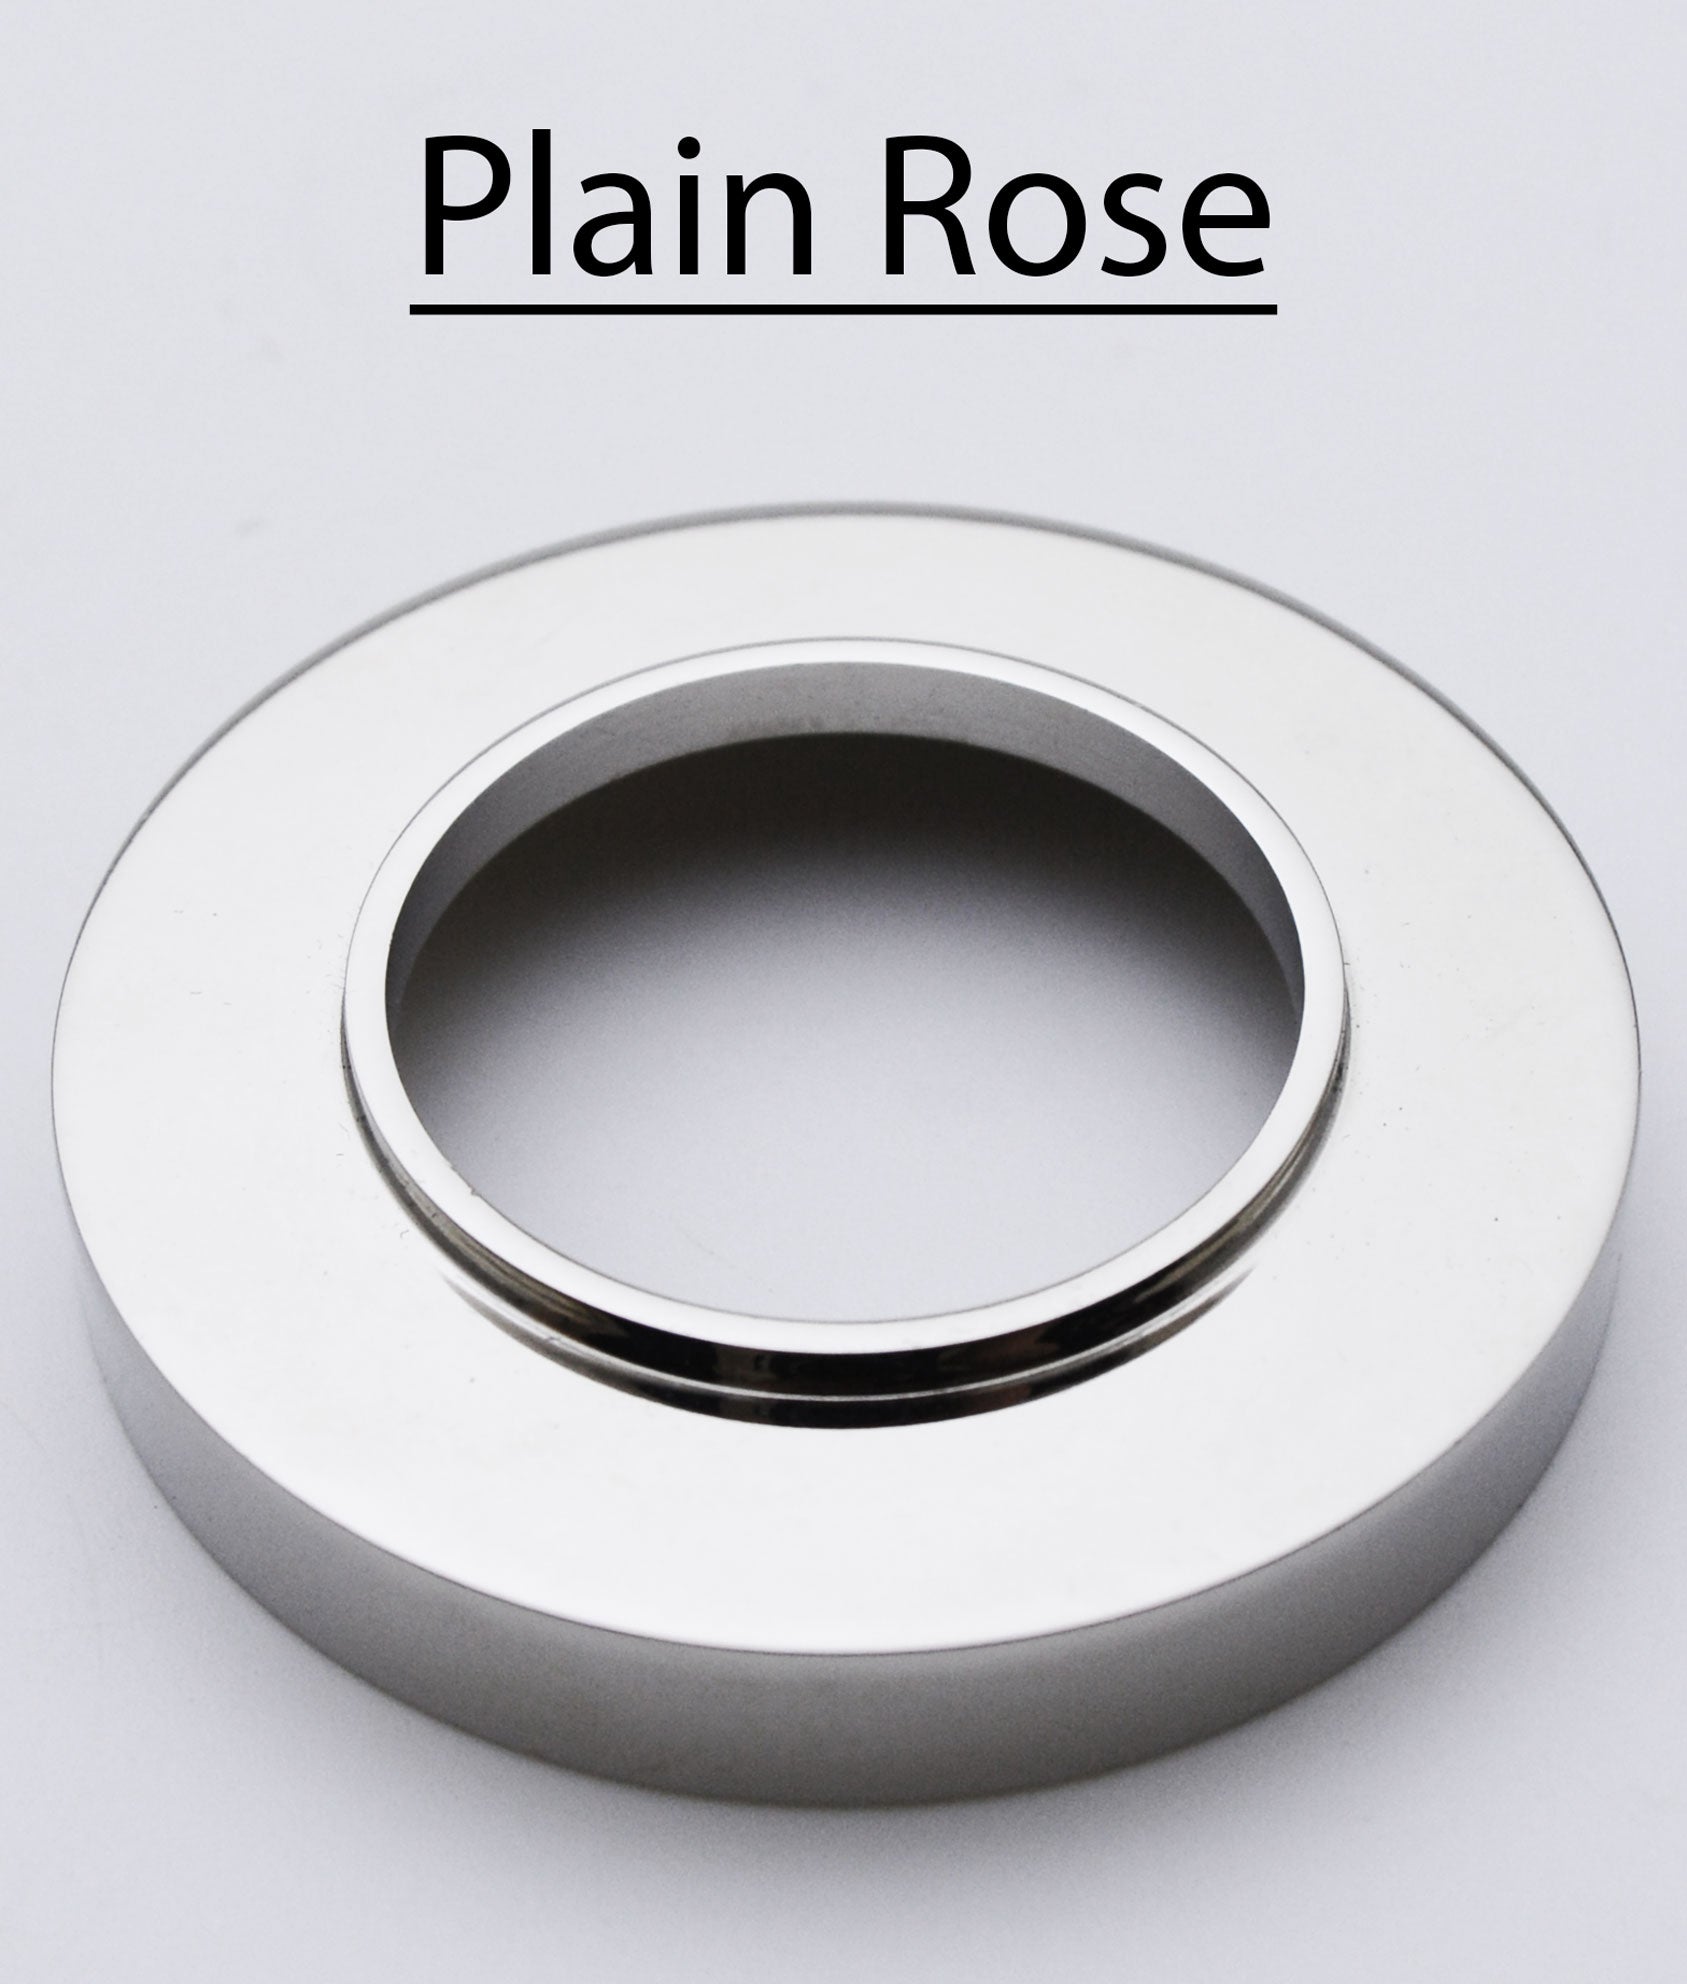 Bjorn Pinched Lever on Plain Rose